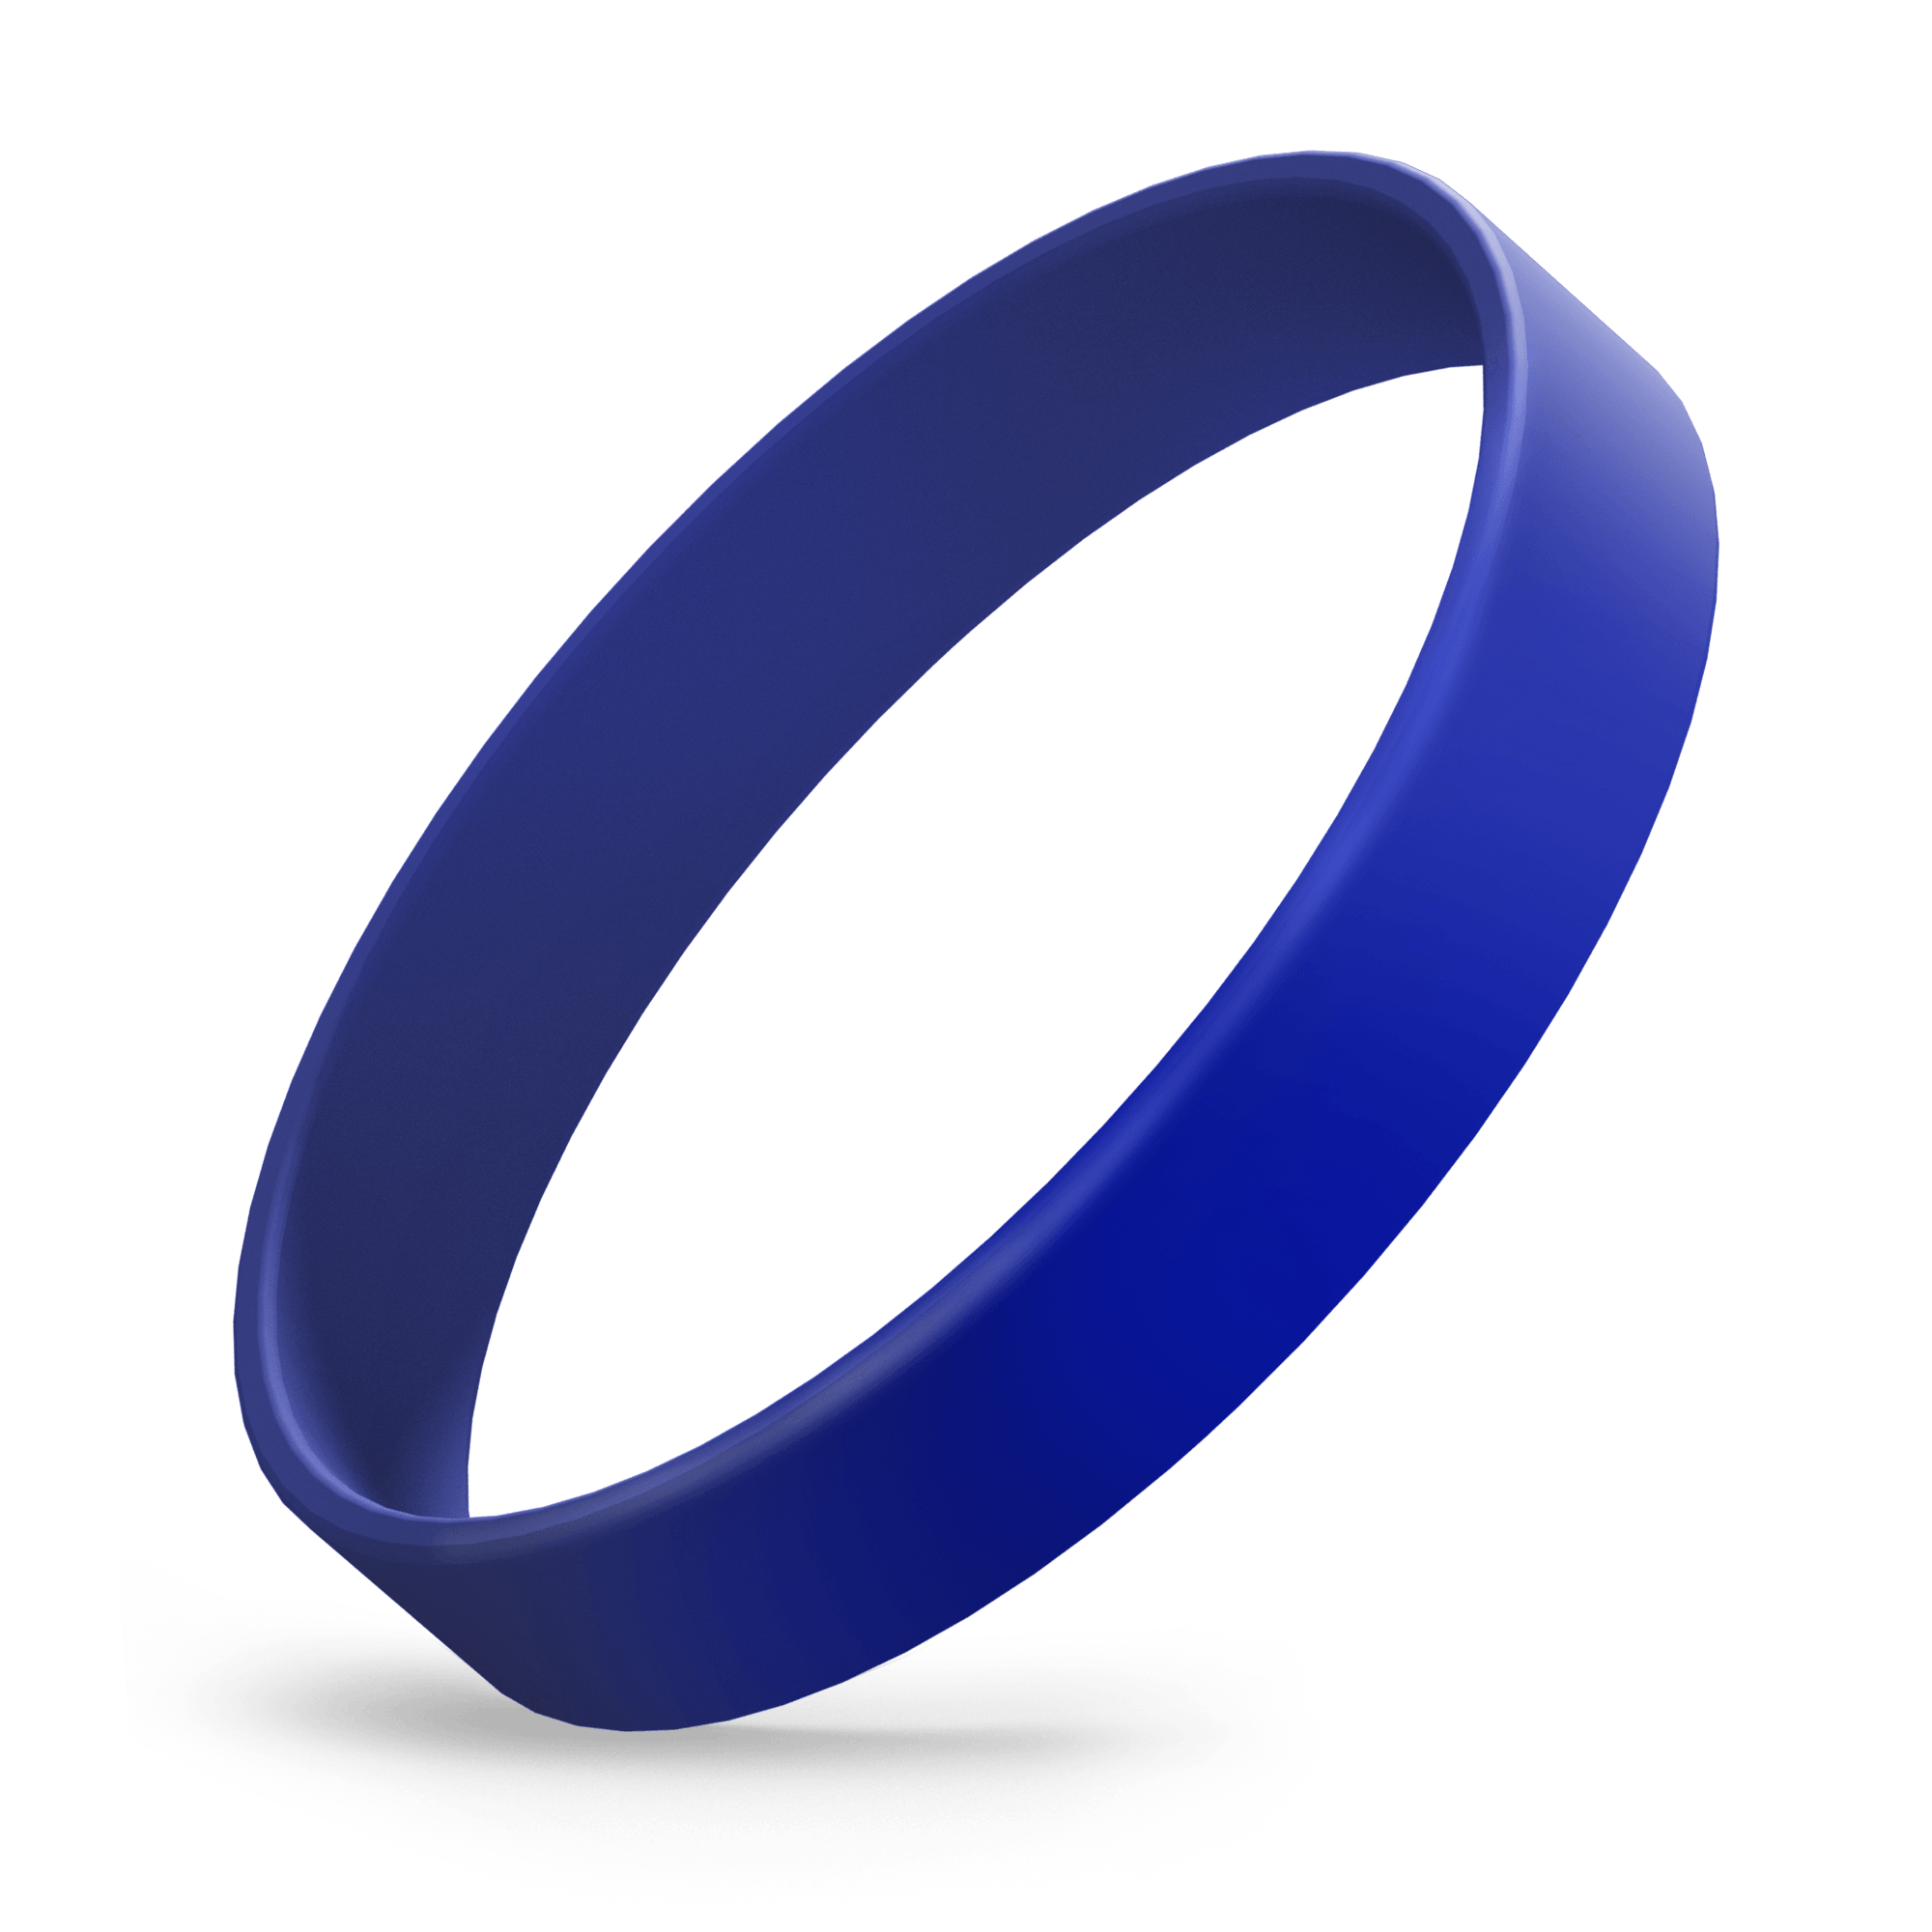 Custom Ink Injected (Reflex Blue) Silicone Wristbands - Rubber Bracelets by Wristband Resources